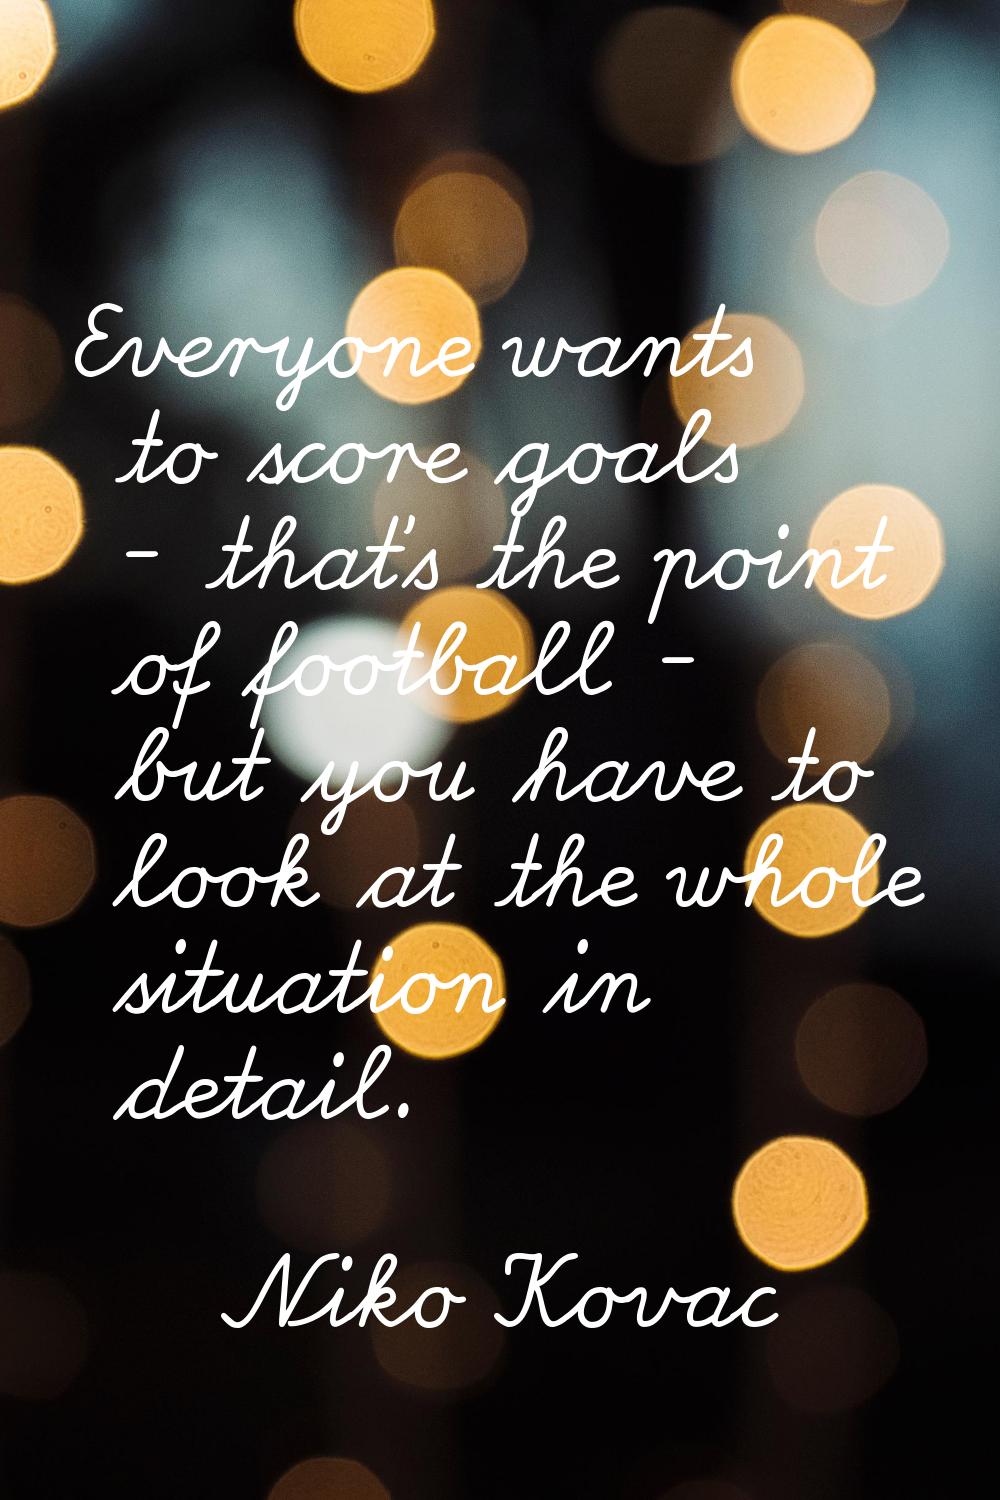 Everyone wants to score goals - that's the point of football - but you have to look at the whole si